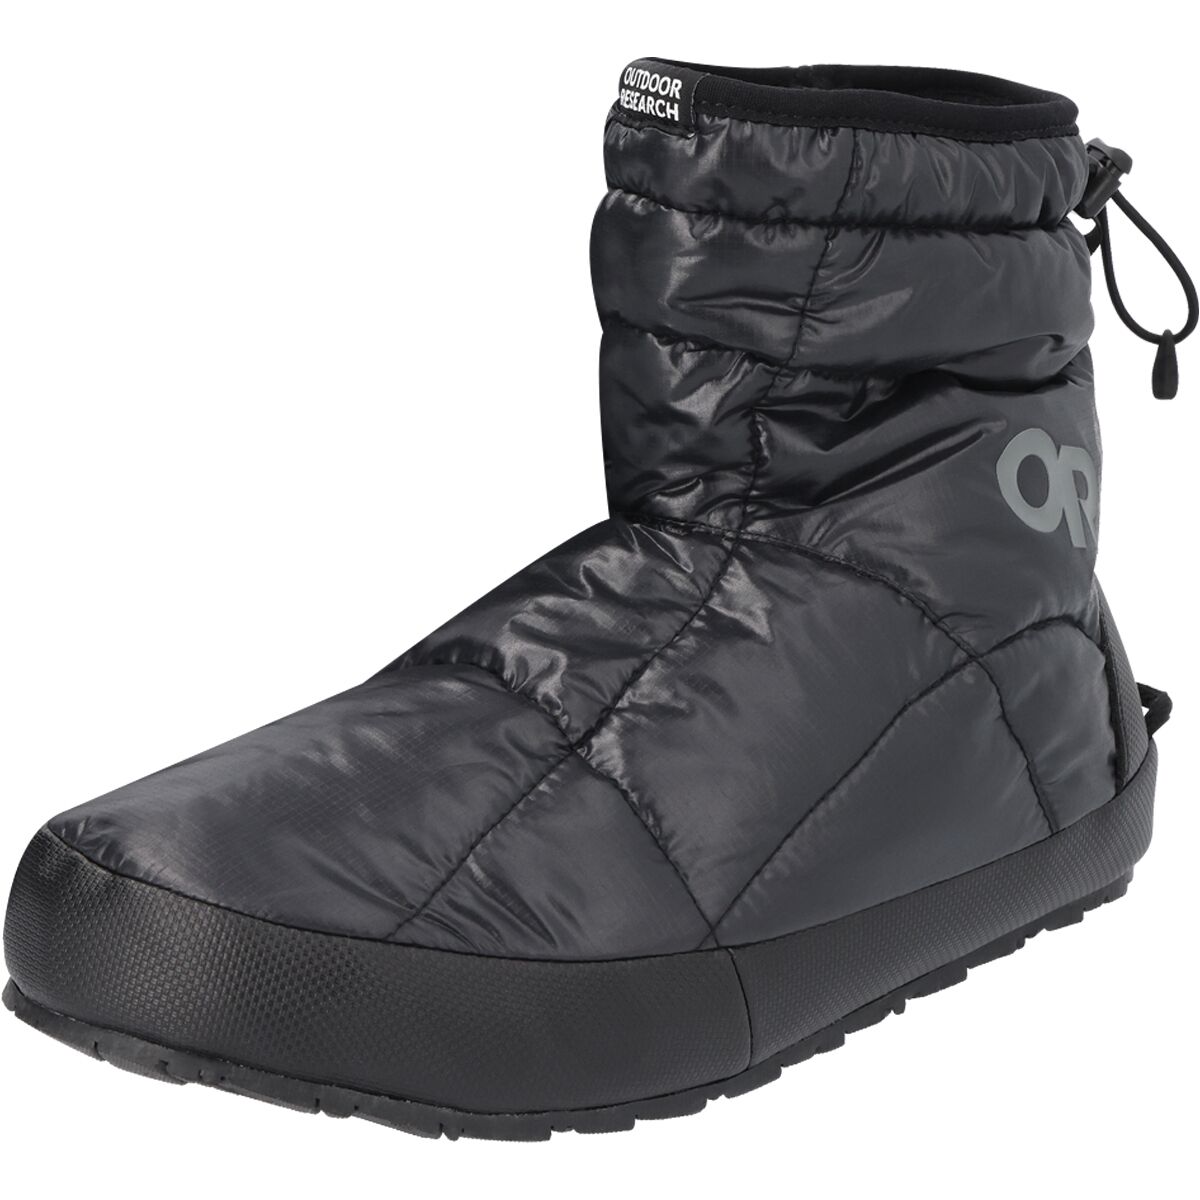 Outdoor Research Tundra Trax Bootie - Women's